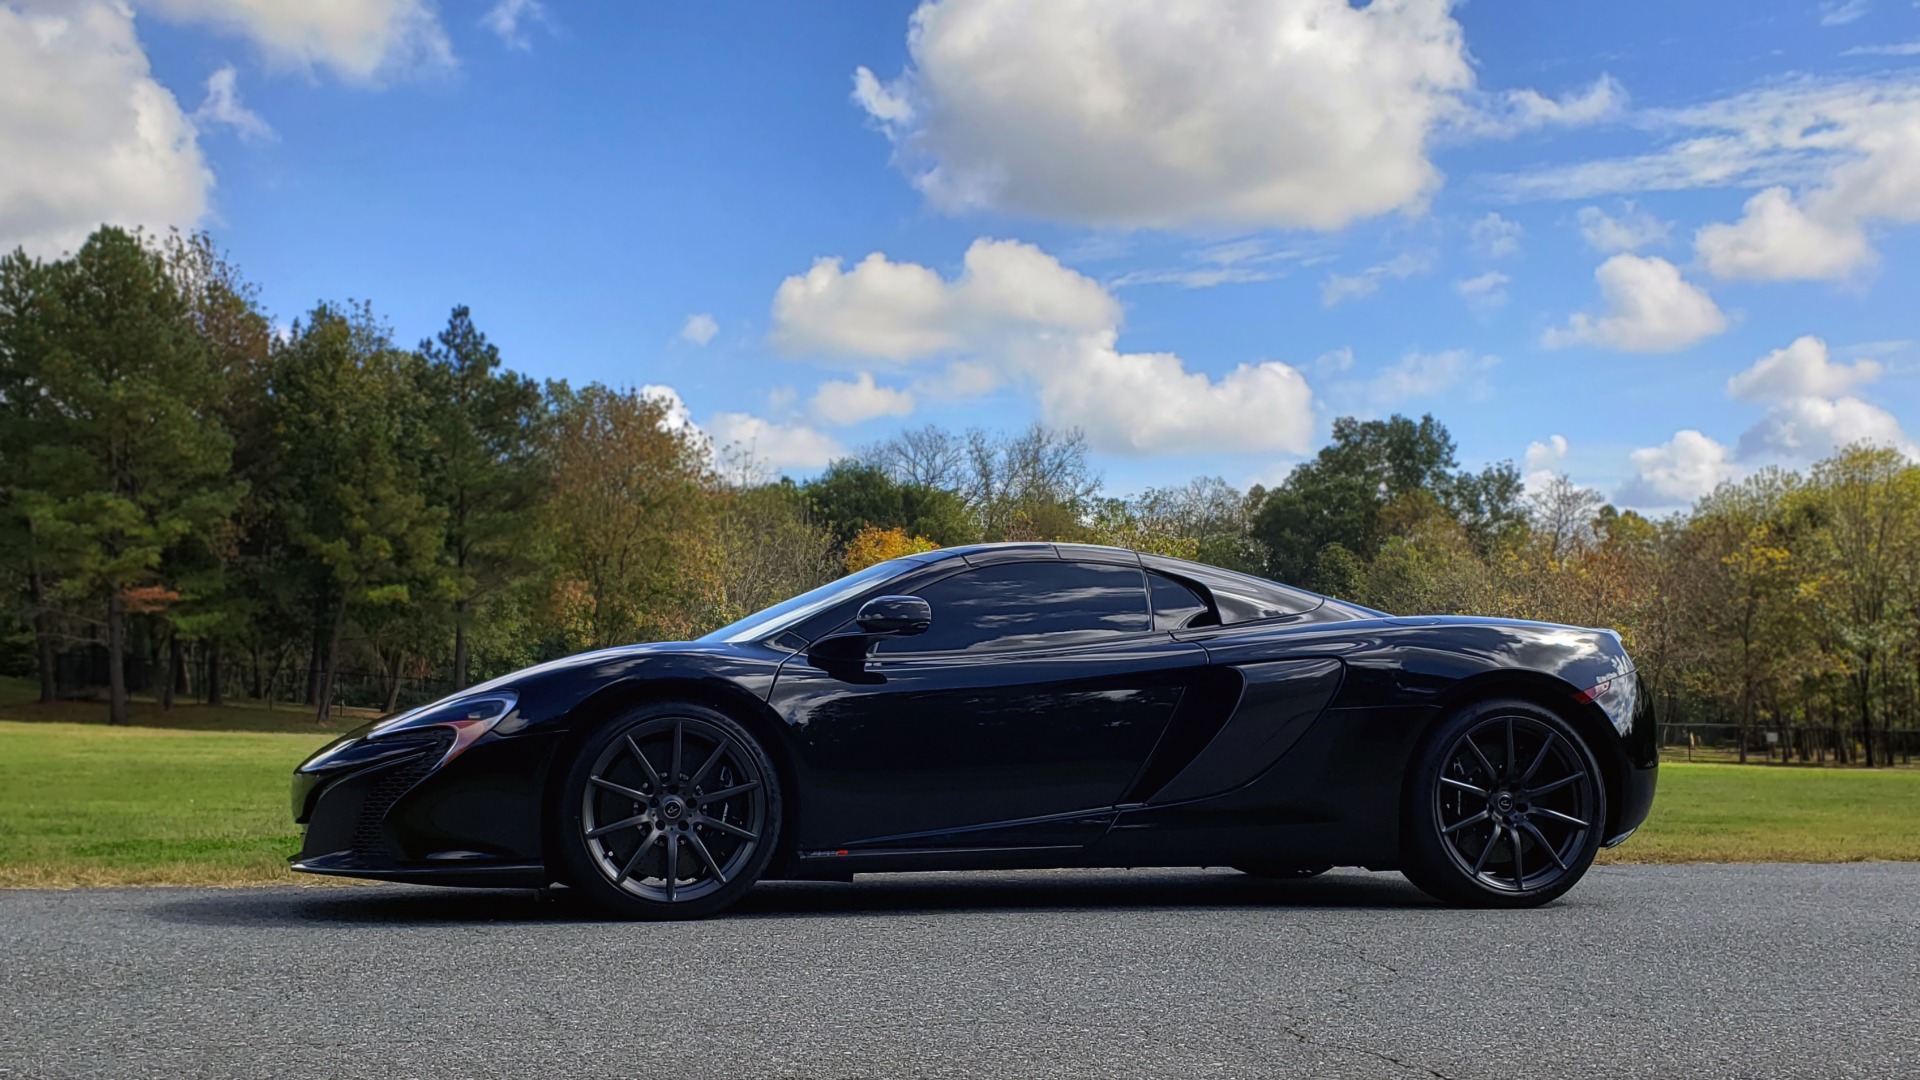 Used 2016 McLaren 650S SPIDER / 641HP / PARK SENSORS / LOW MILES / 1-OWNER for sale Sold at Formula Imports in Charlotte NC 28227 6